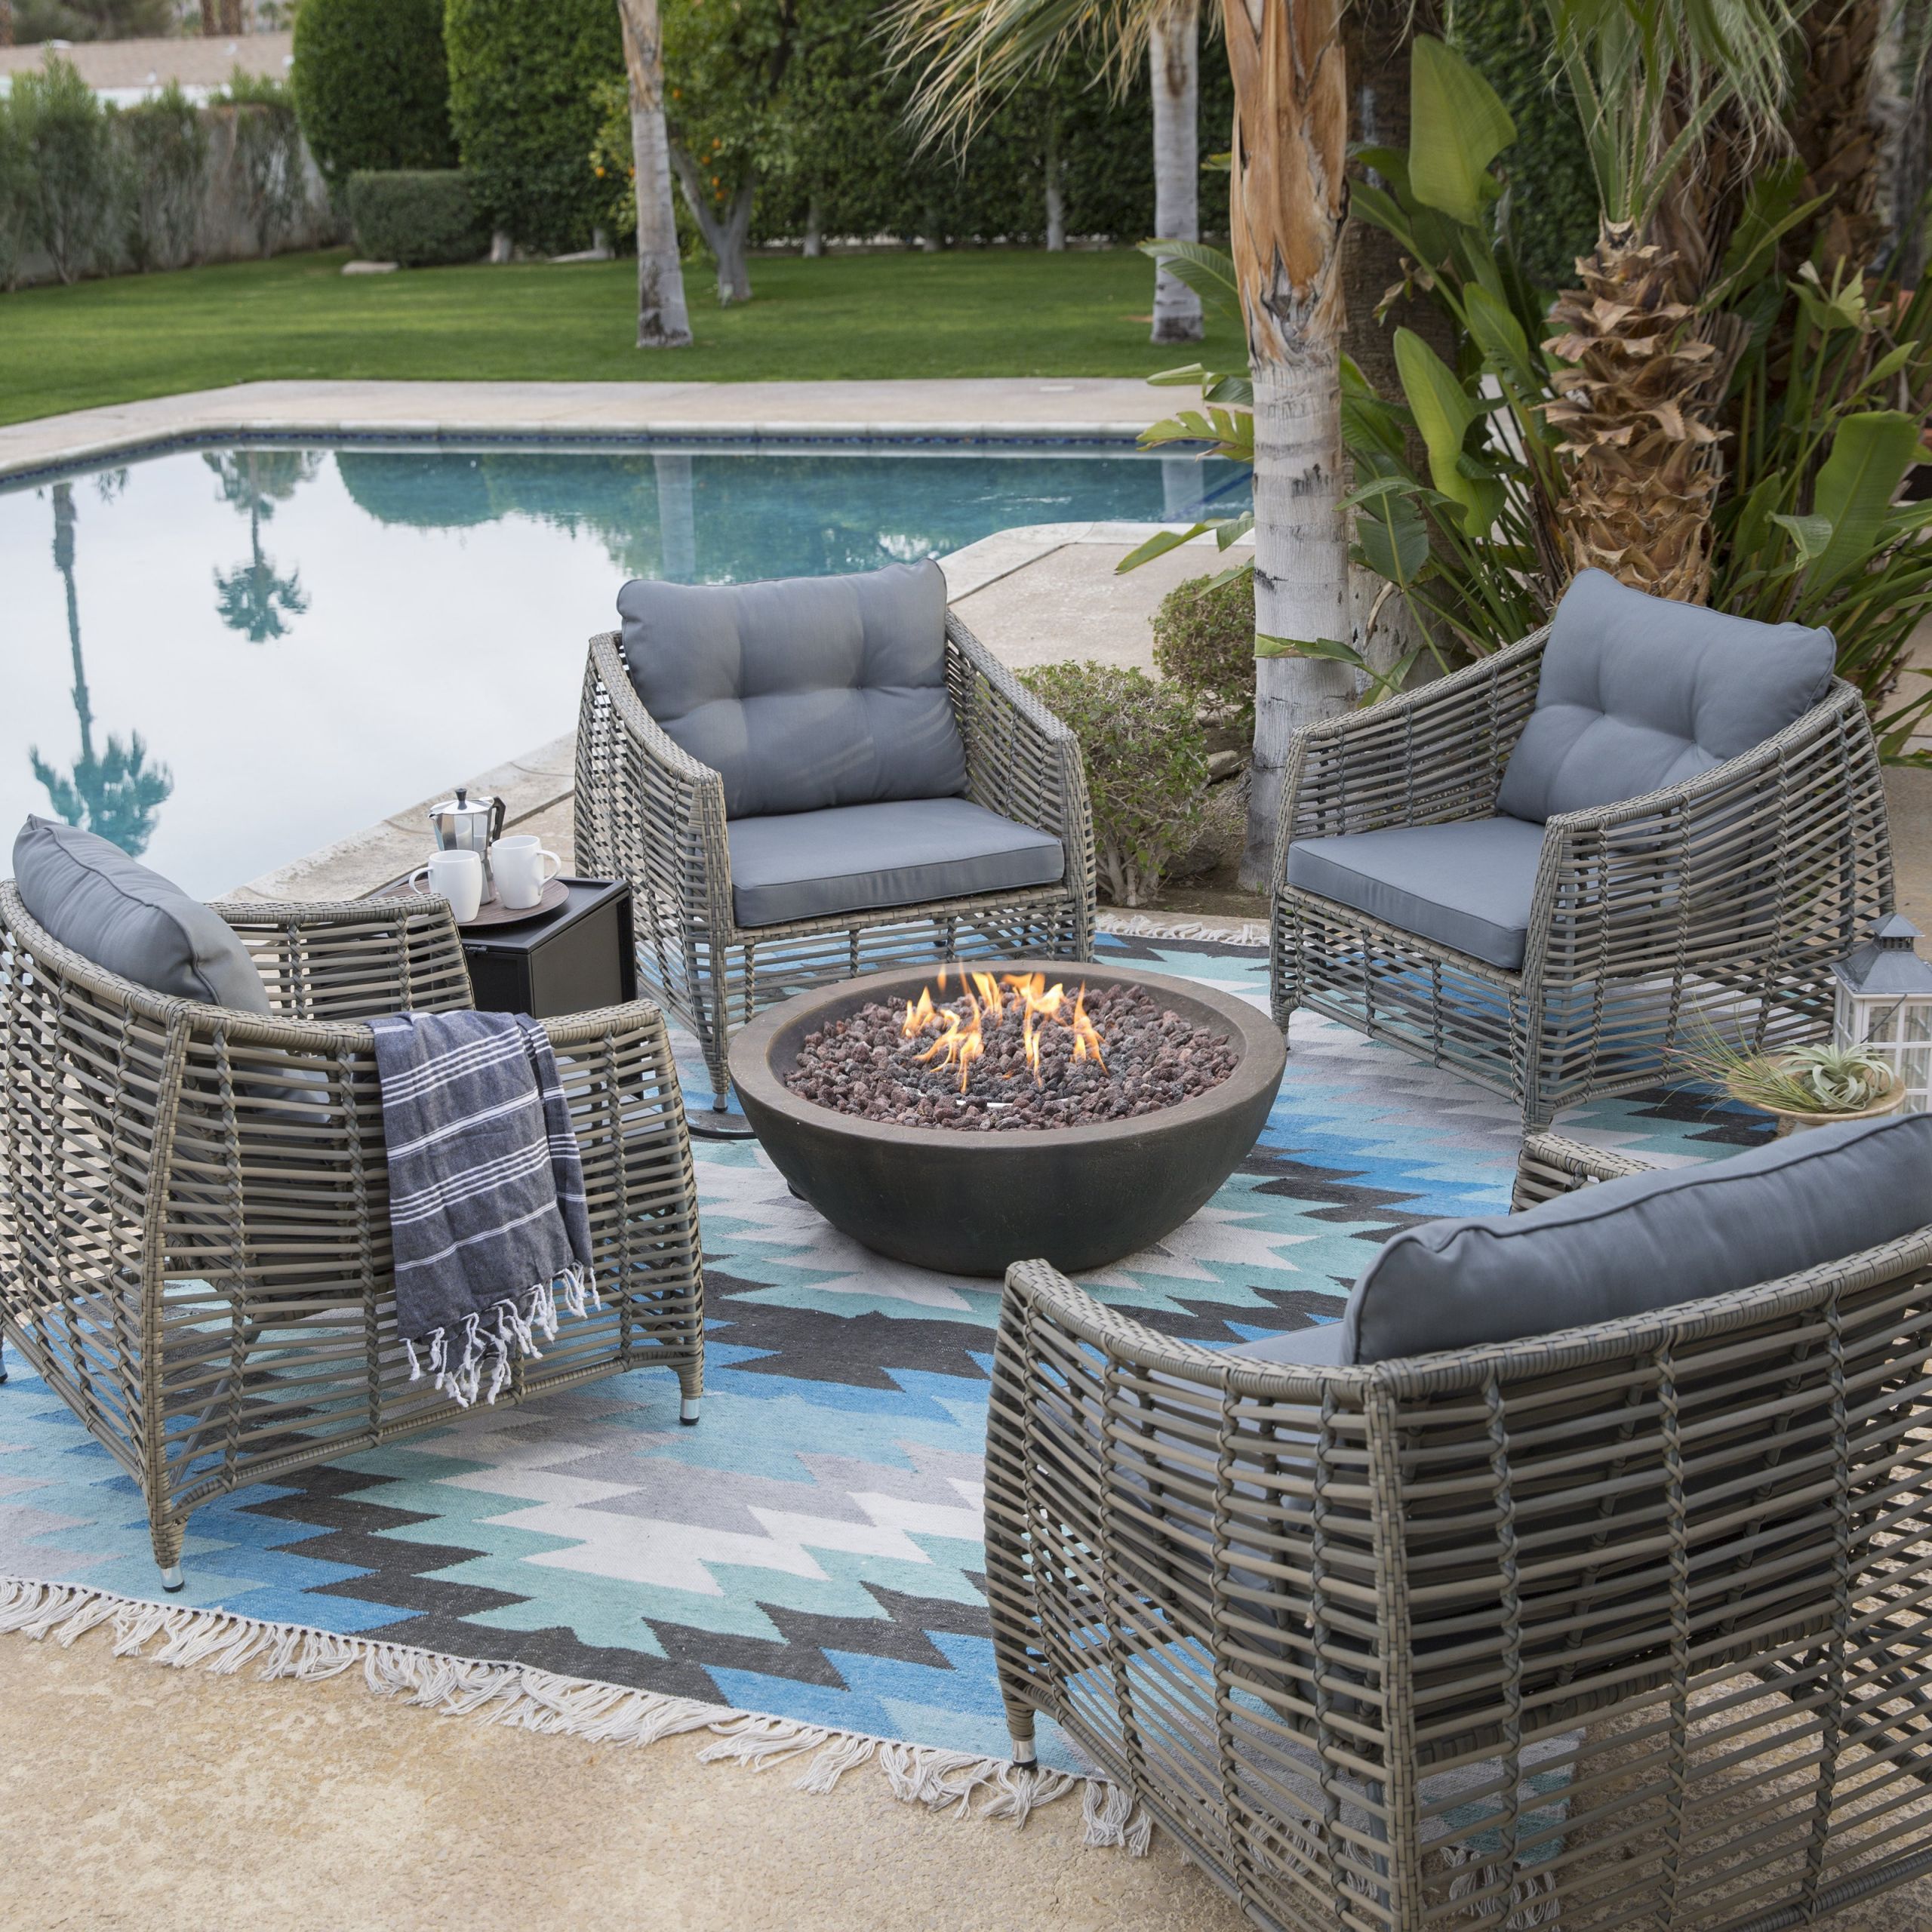 Patio Sets With Fire Pit
 Belham Living Kambree Chat Set with Tucson Fire Pit Fire